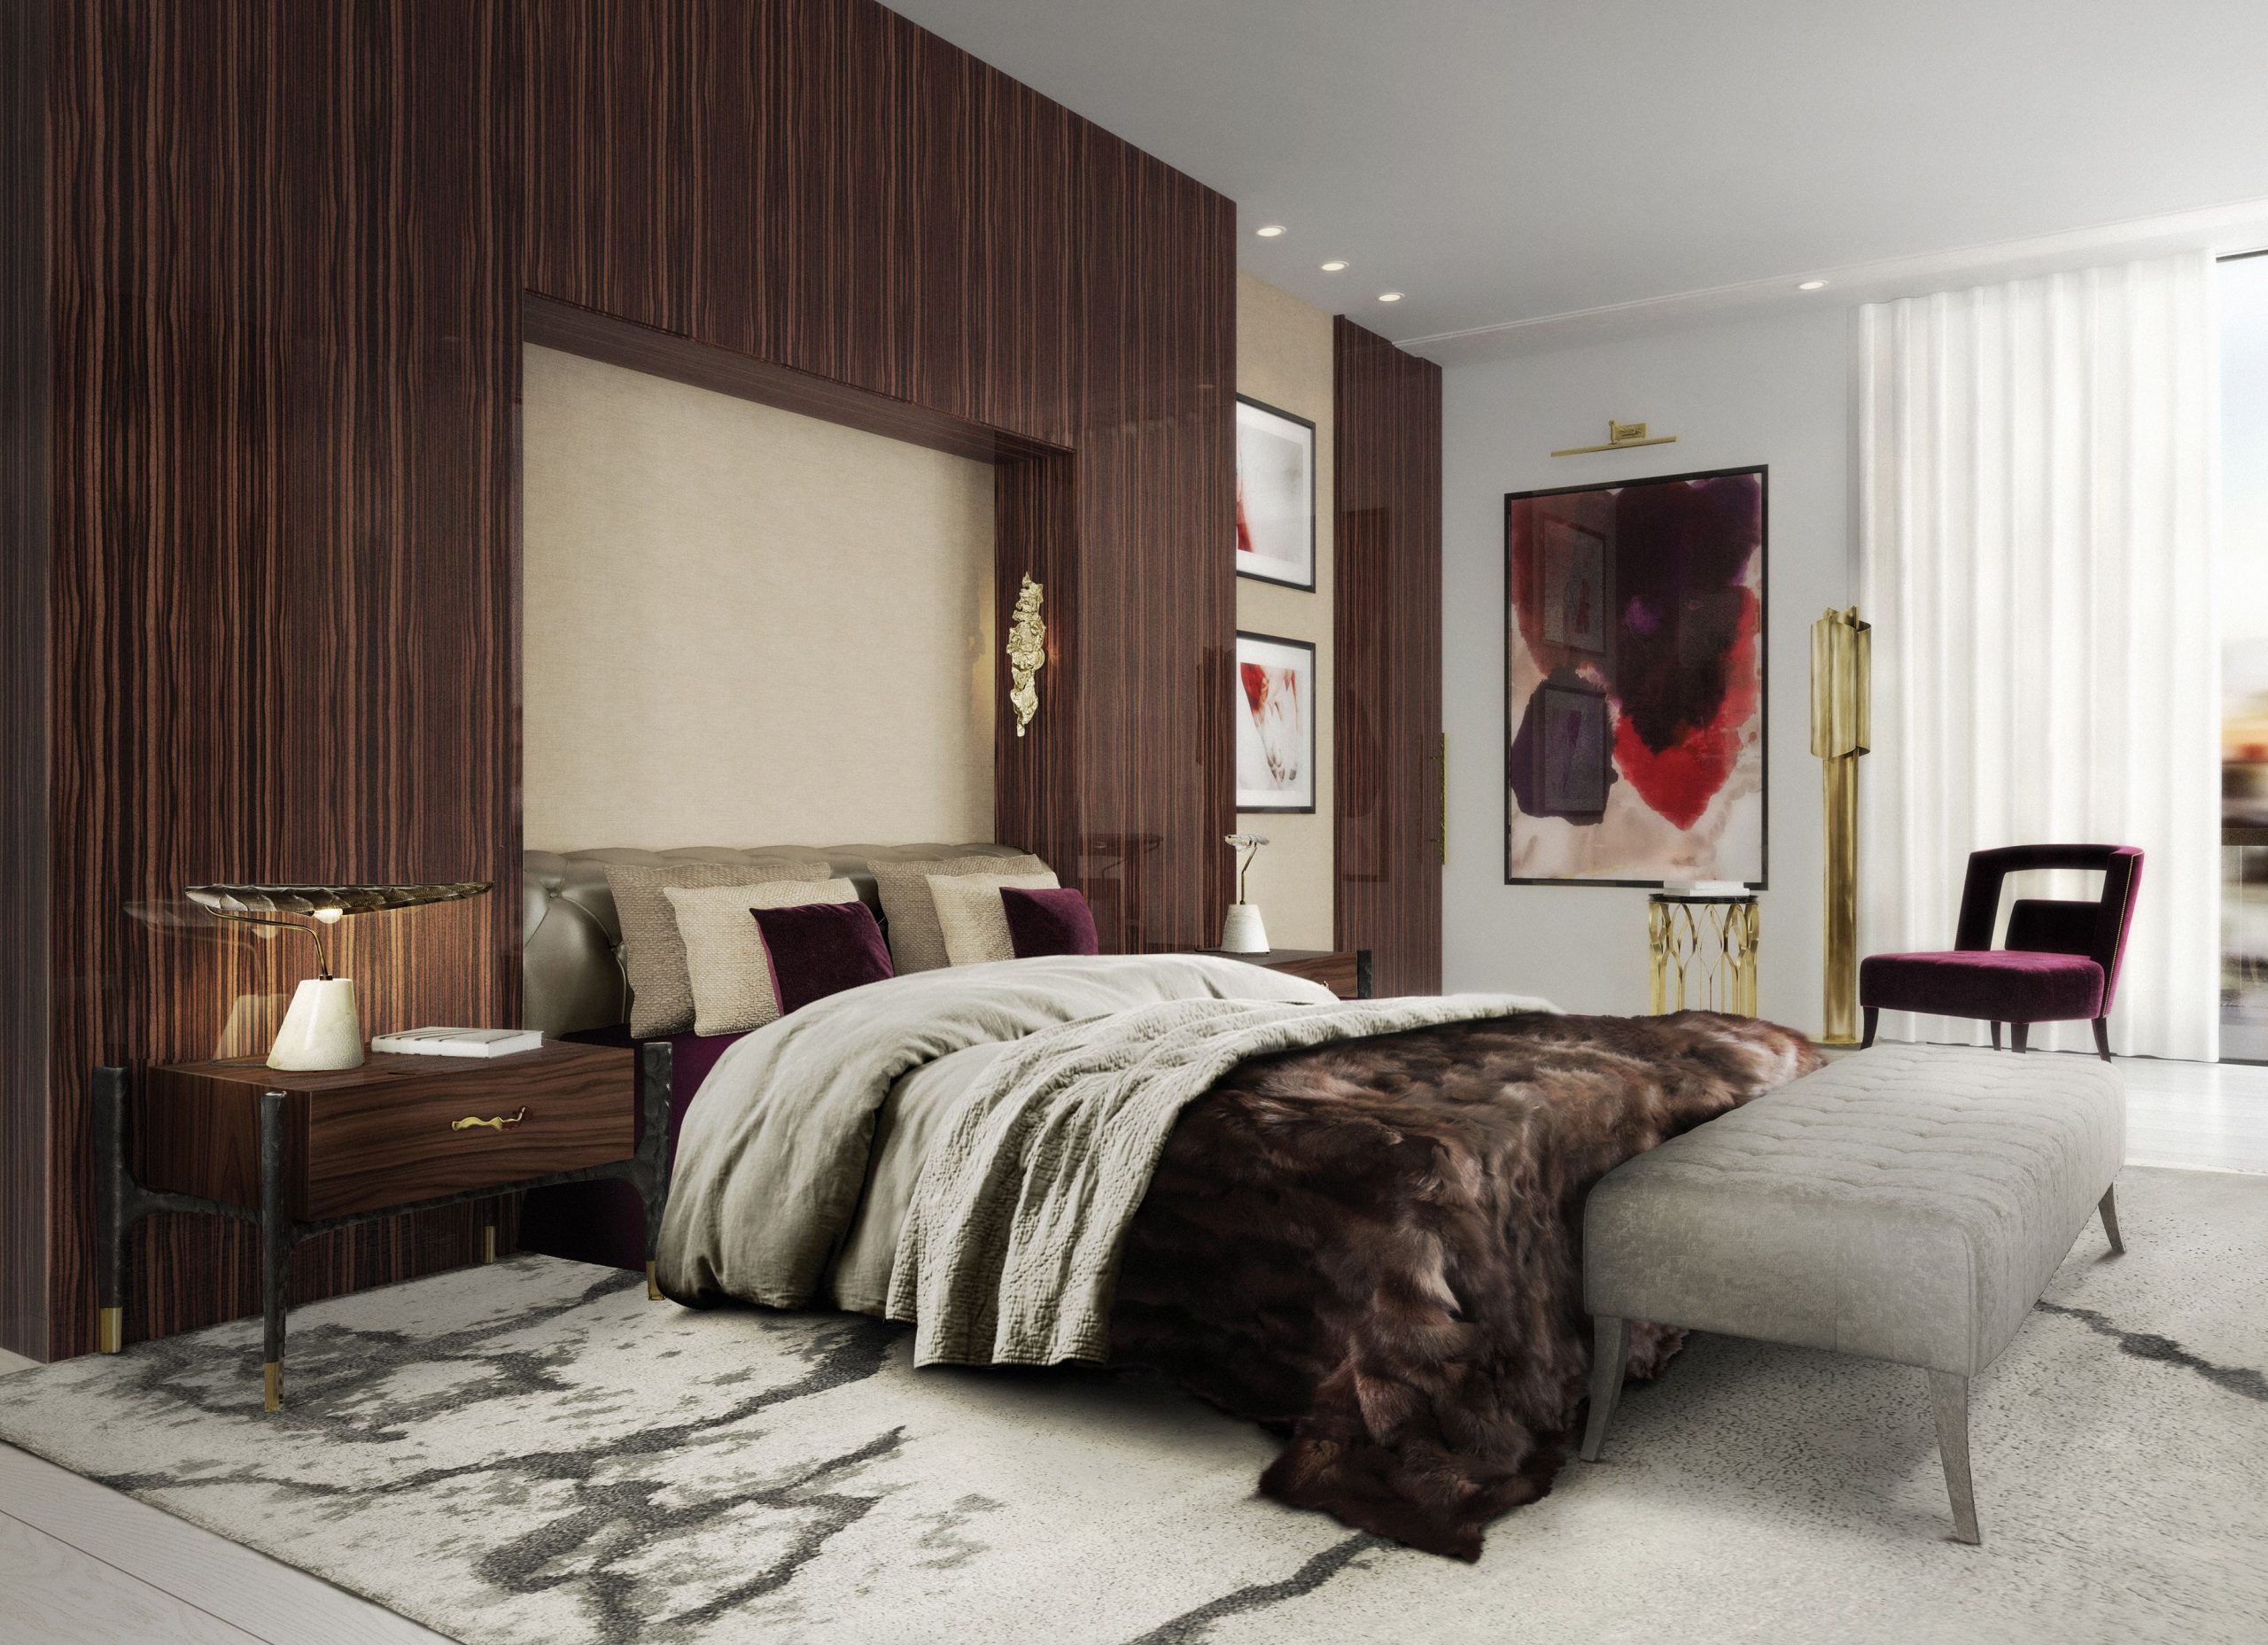 room by room inspirations Enjoy the experience where design collides in a stunning sensory mix